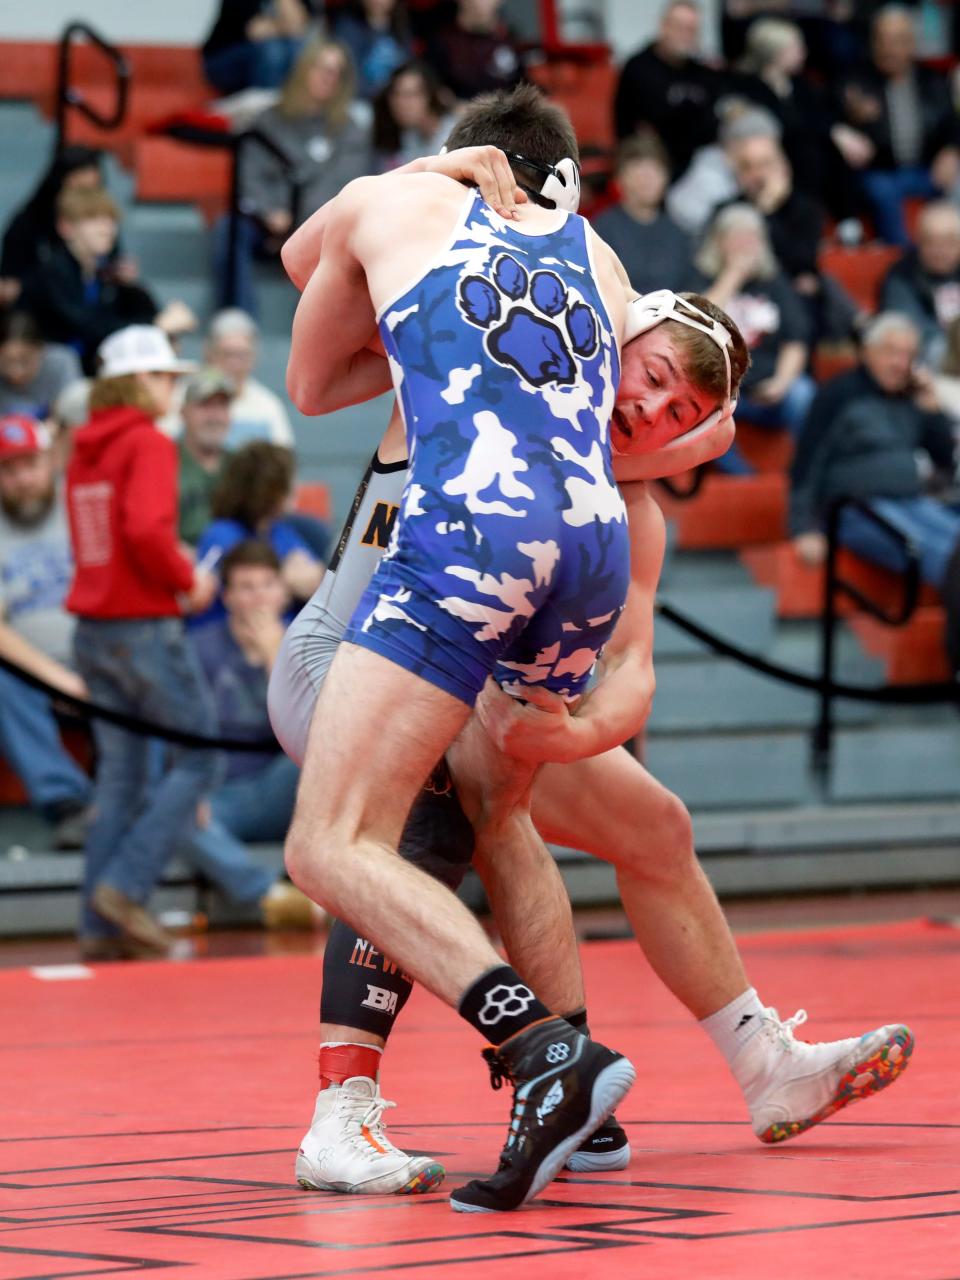 New Lexington's Hunter Rose picks up Washington Court House's Mack Parsley during the finals at 165 pounds at the Division II district tournament on Saturday at Steubenville High School. Rose won, 7-5, to earn a No. 1 seed at next weekend's state tournament.